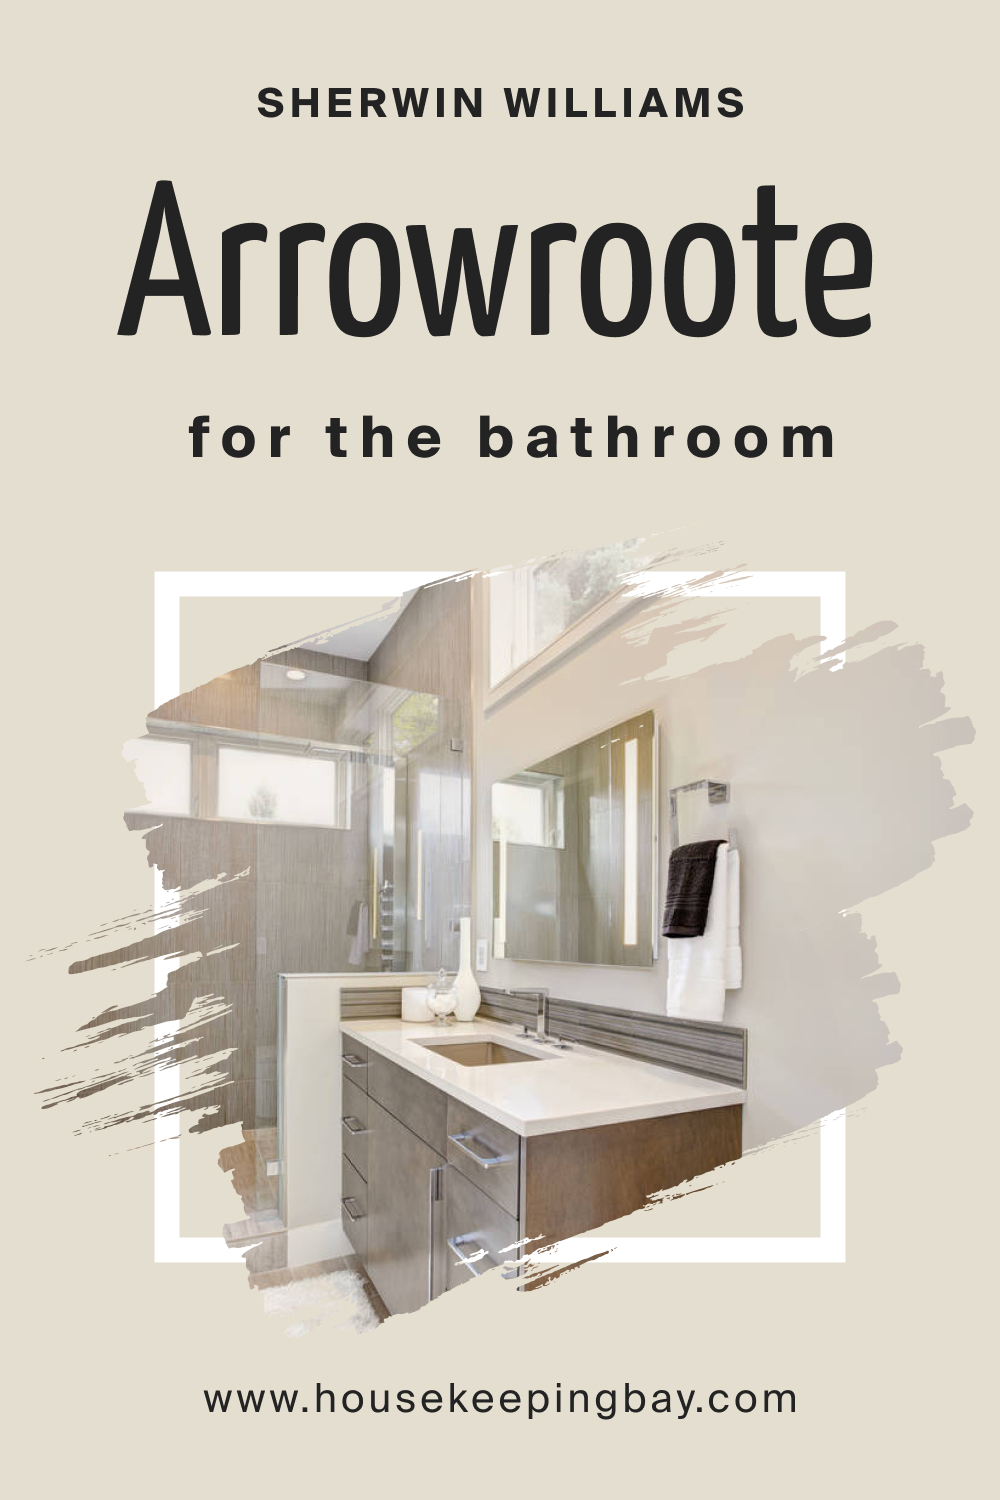 Sherwin Williams. SW 9502 Arrowroote For the Bathroom